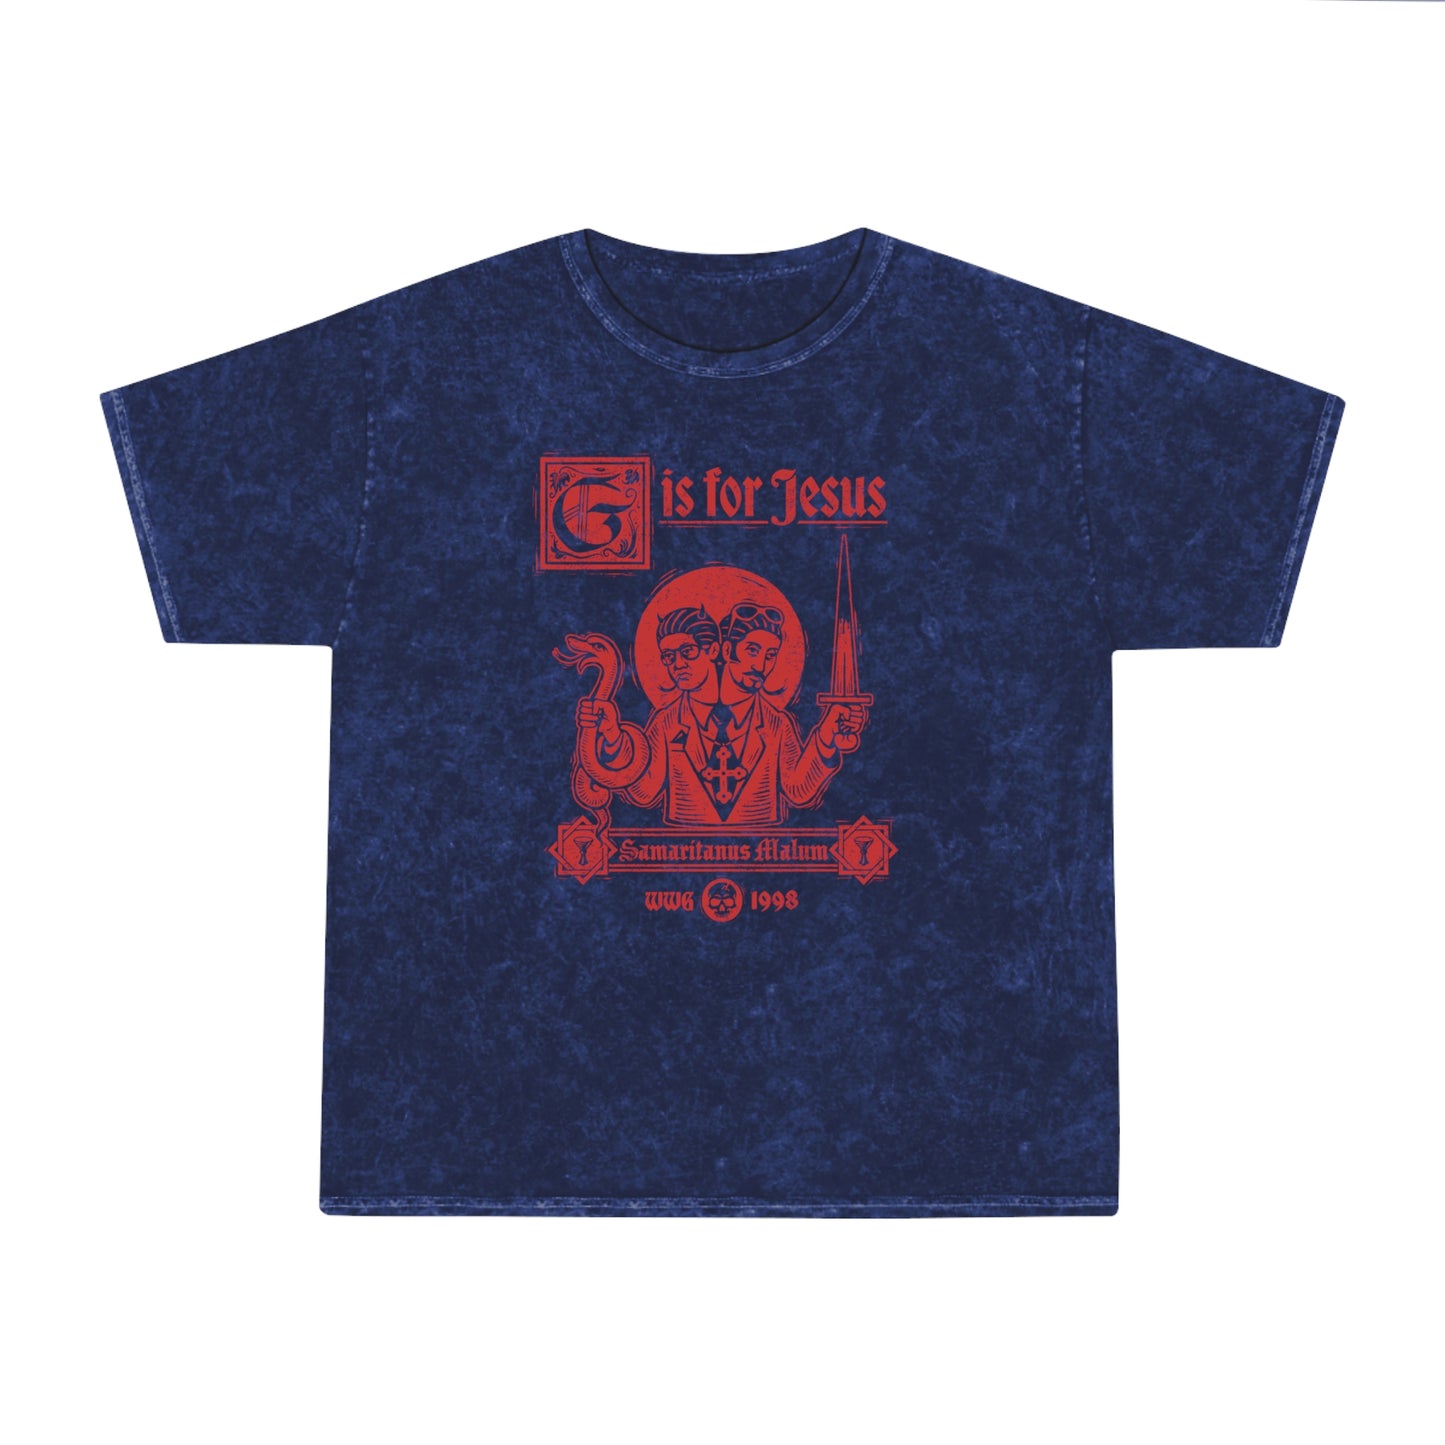 G is for Jesus T-Shirt (Red Print - Mineral Wash)